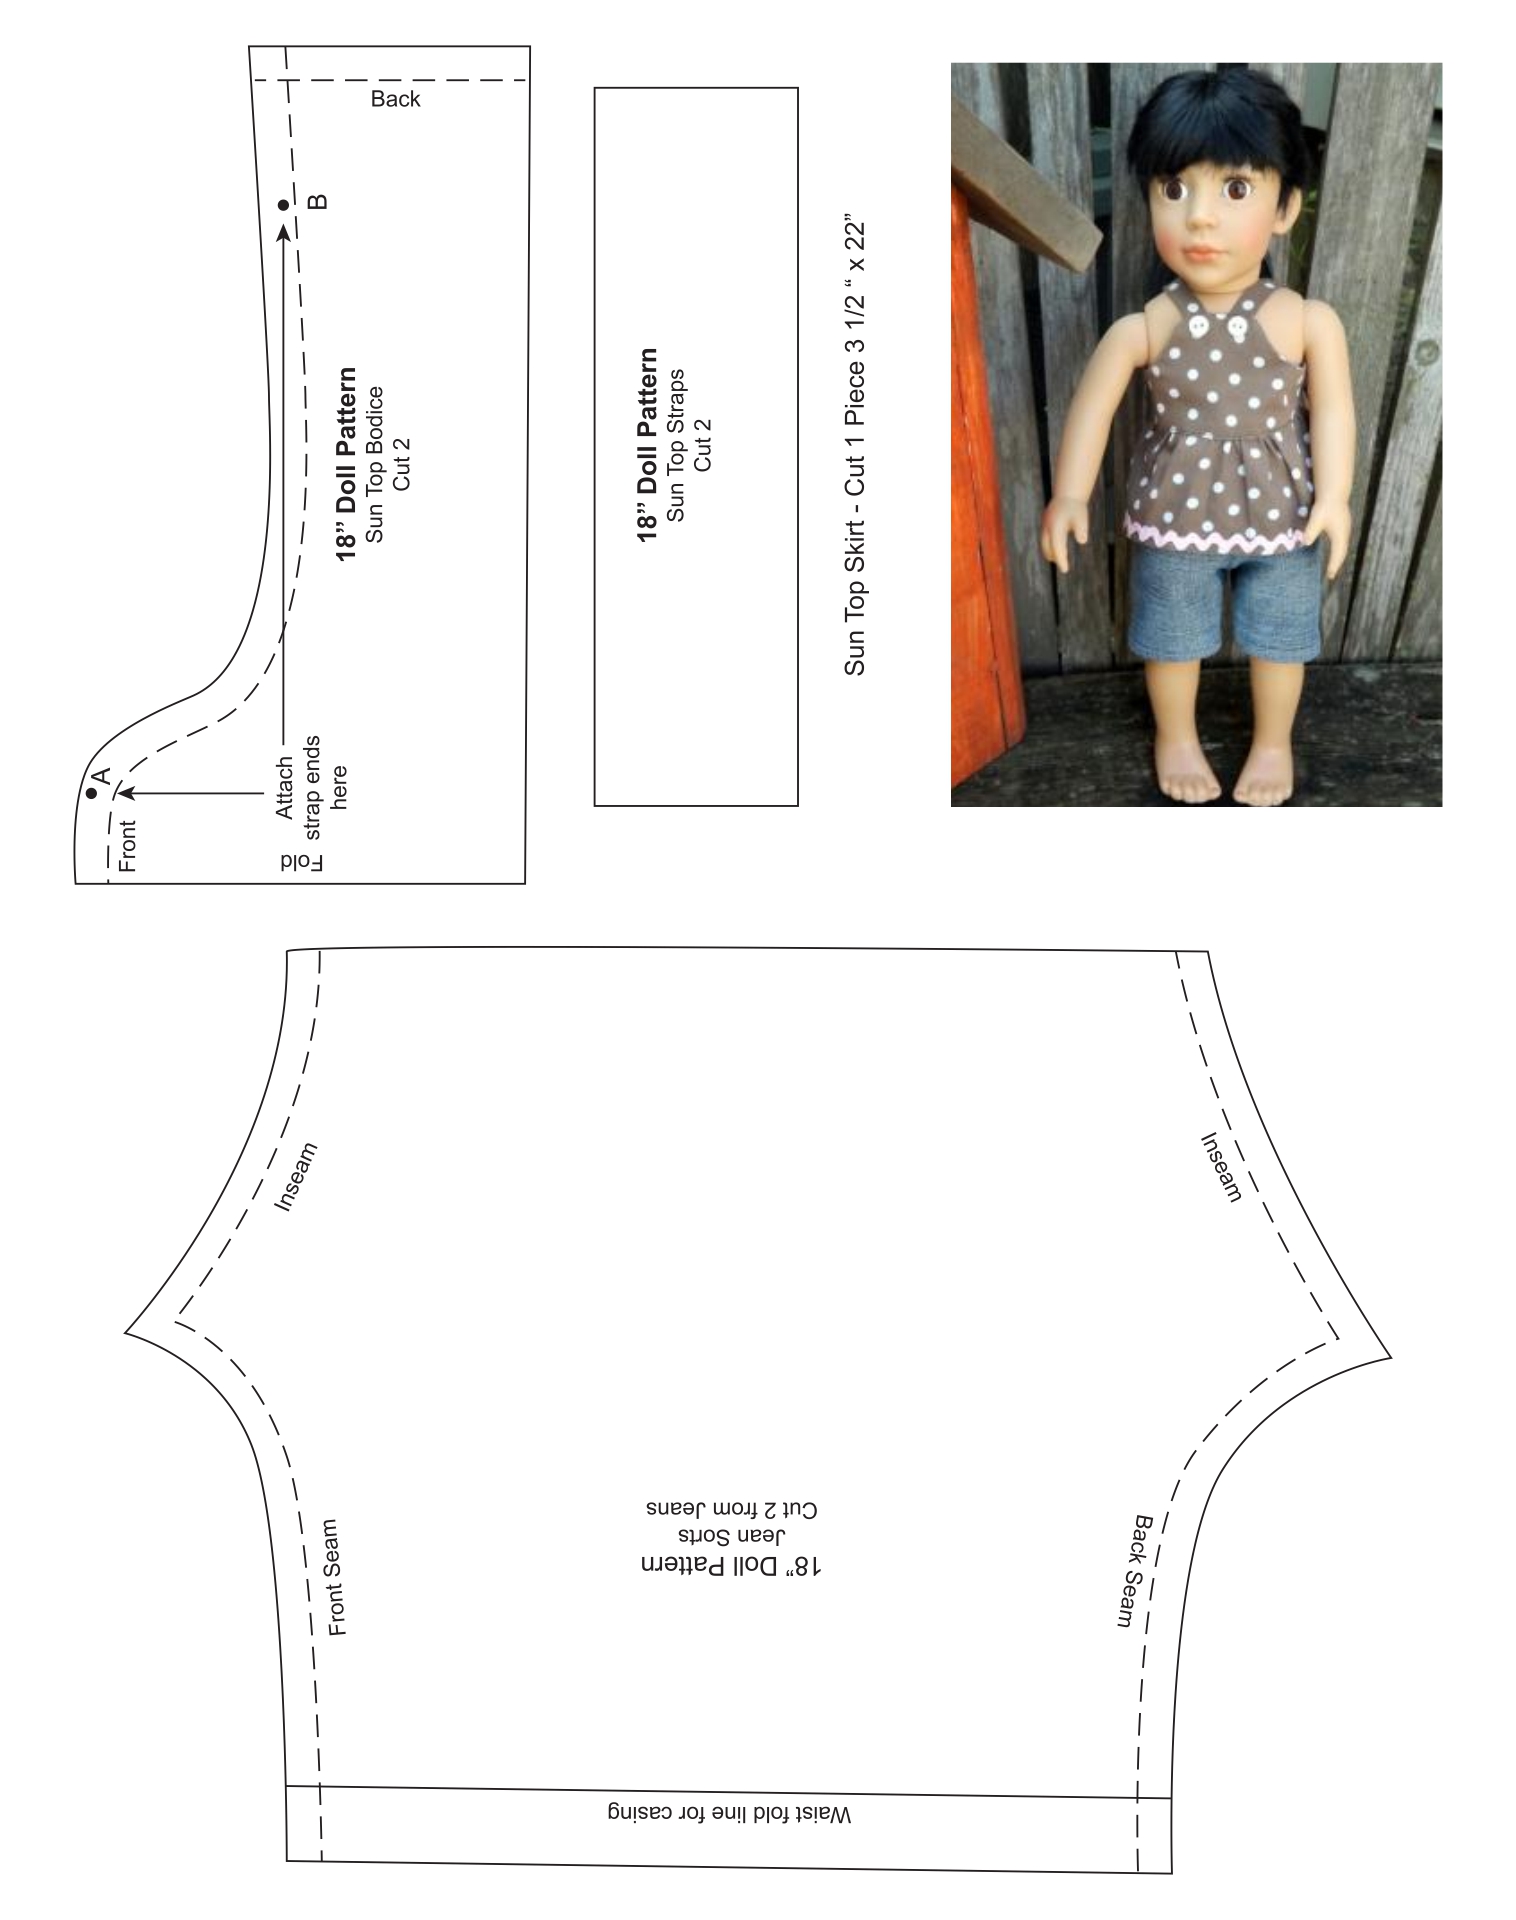 18-inch-doll-patterns-free-printable